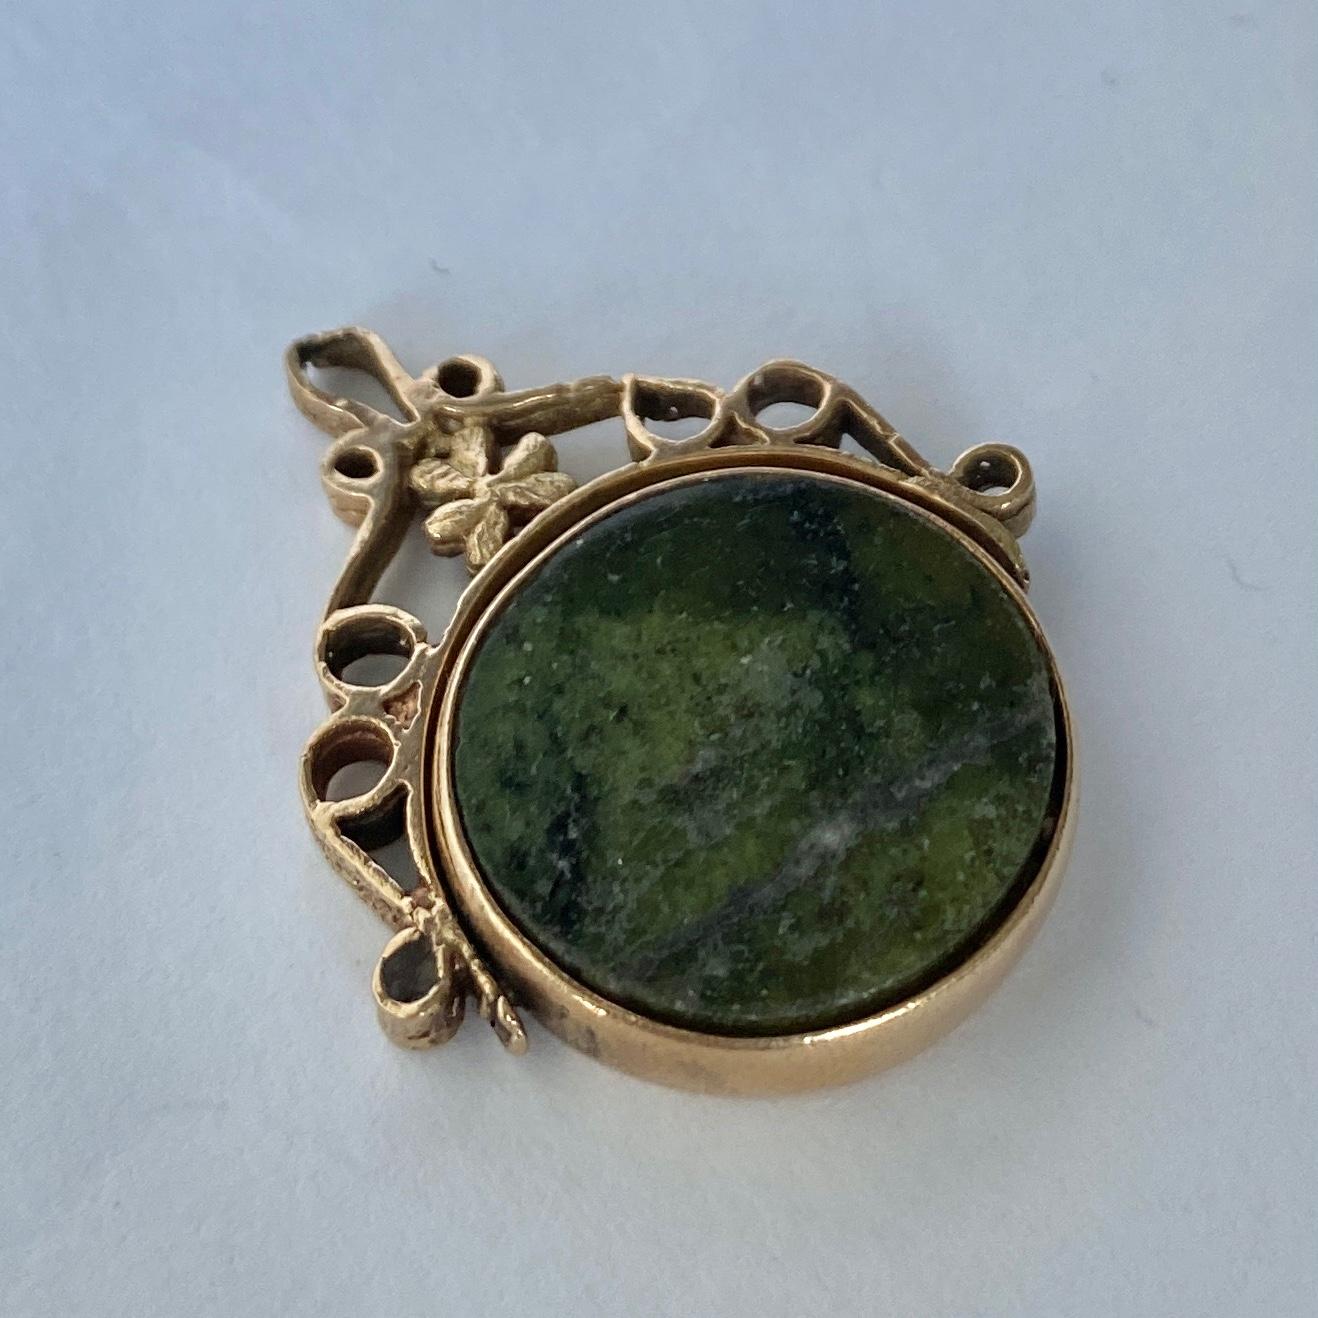 This gorgeous green marbles agate is full of detail. The frame has scroll detail and also has a shamrock under the loop. Fully hallmarked Dublin 1847.

Stone Diameter: 18mm

Weight: 5.3g